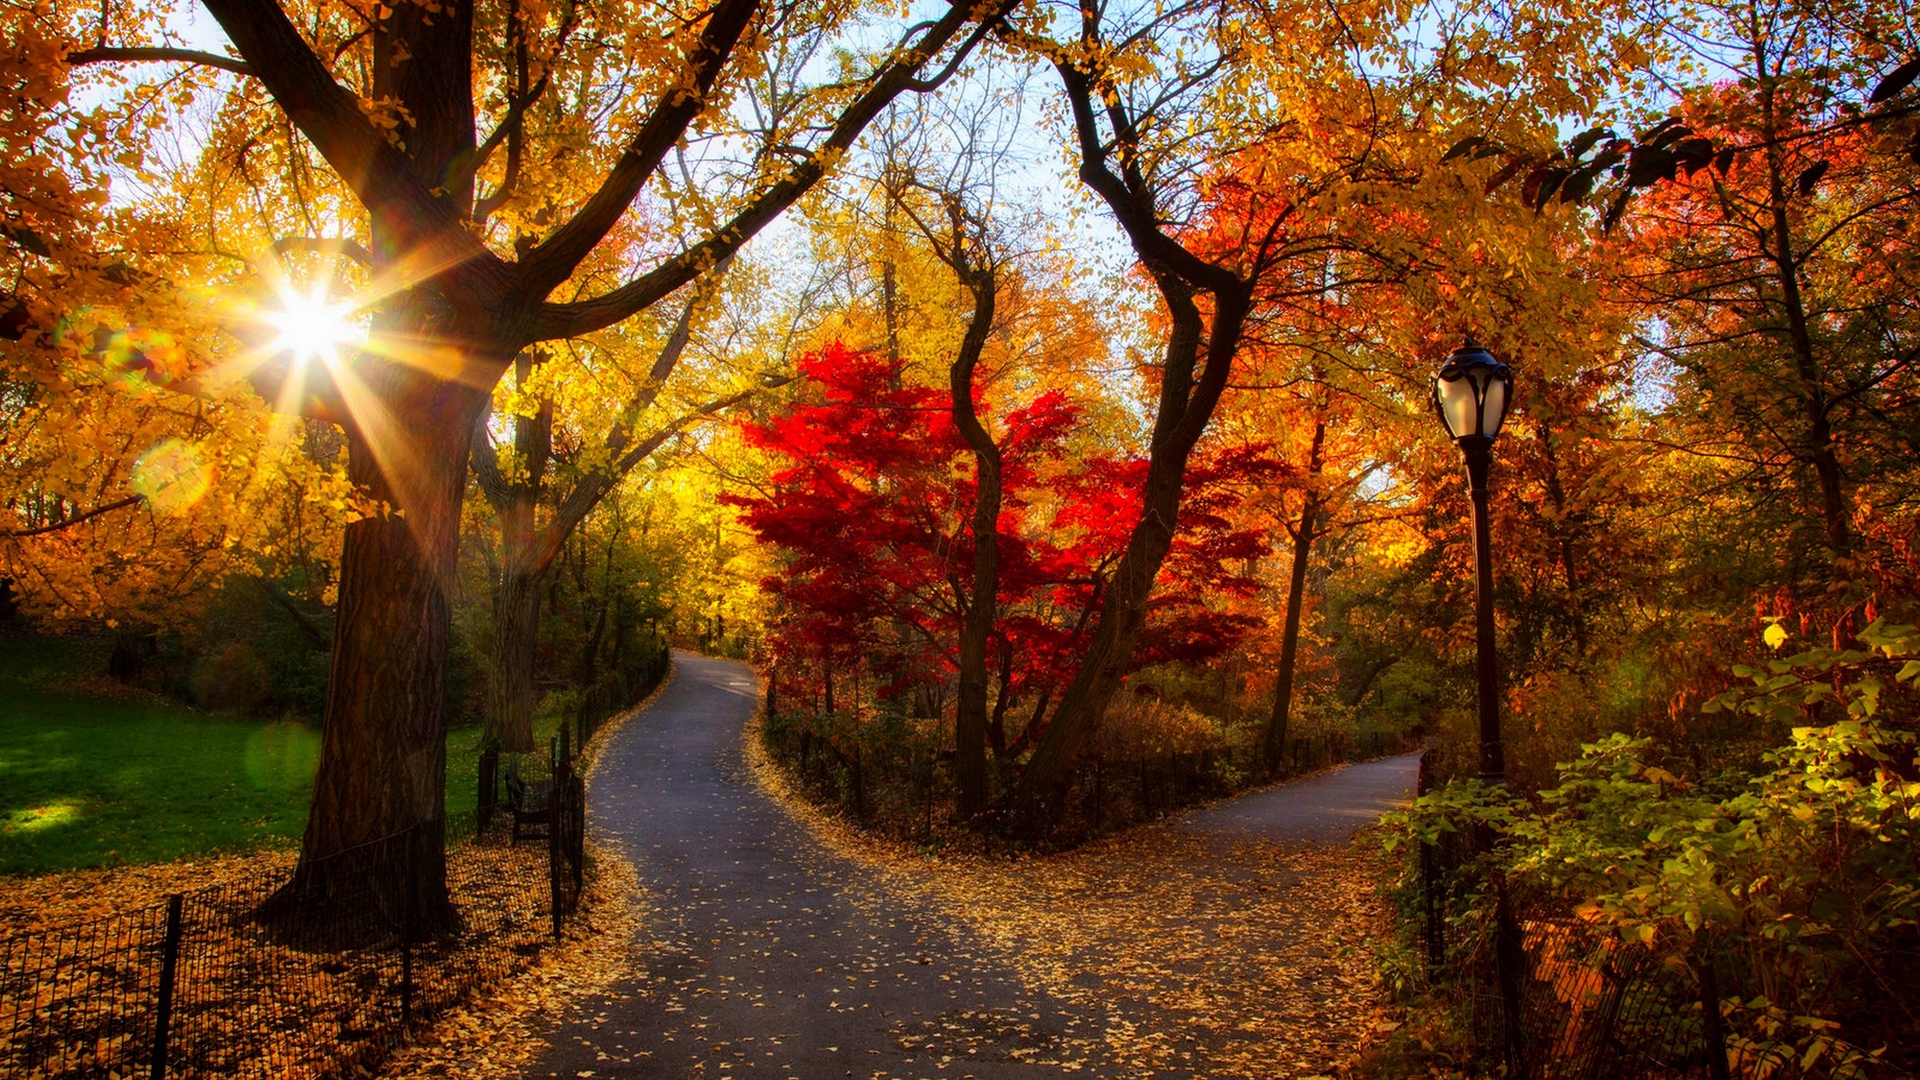 Sunrise View Of Park Trees And Foliage In Autumn - Autumn Trees Path - HD Wallpaper 